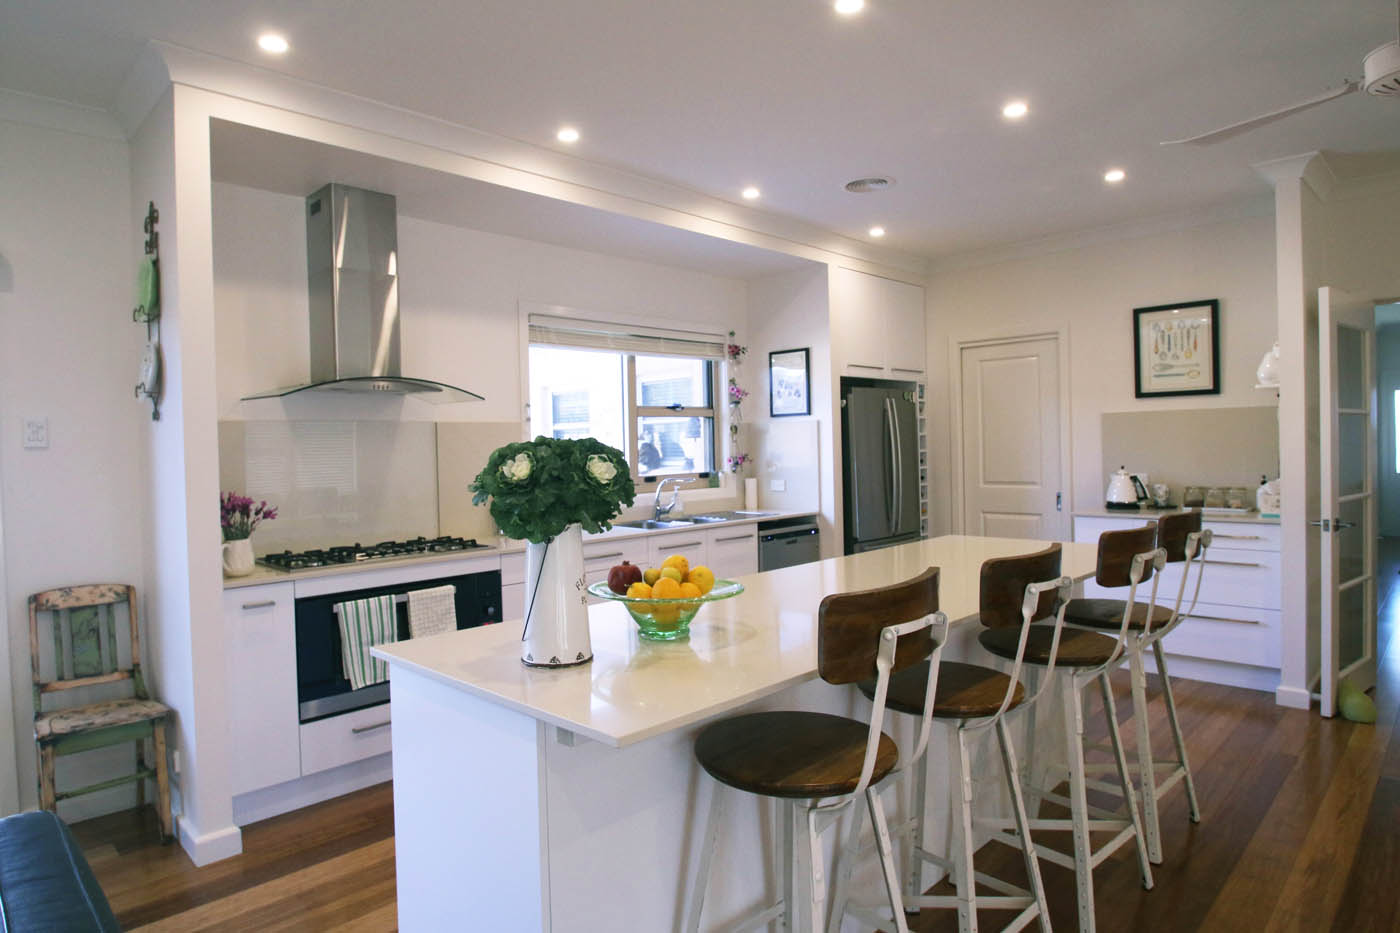 Rustic stools in clean white kitchen